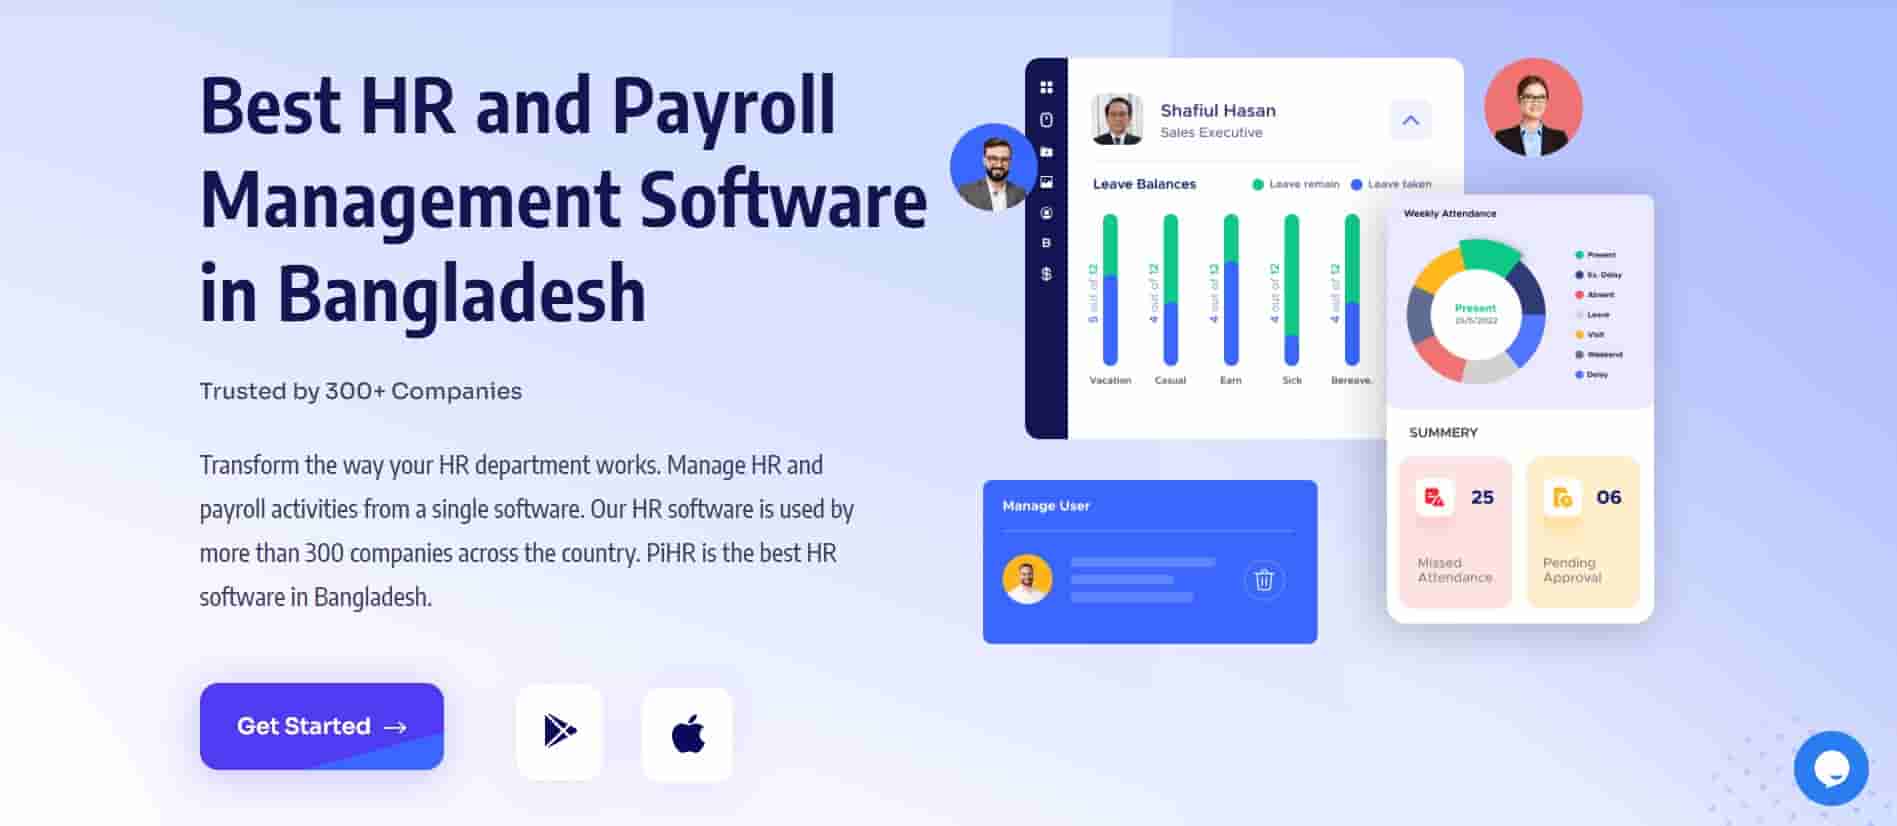 An image of PiHR, which is one of the best HR software from Bangladesh for payroll management